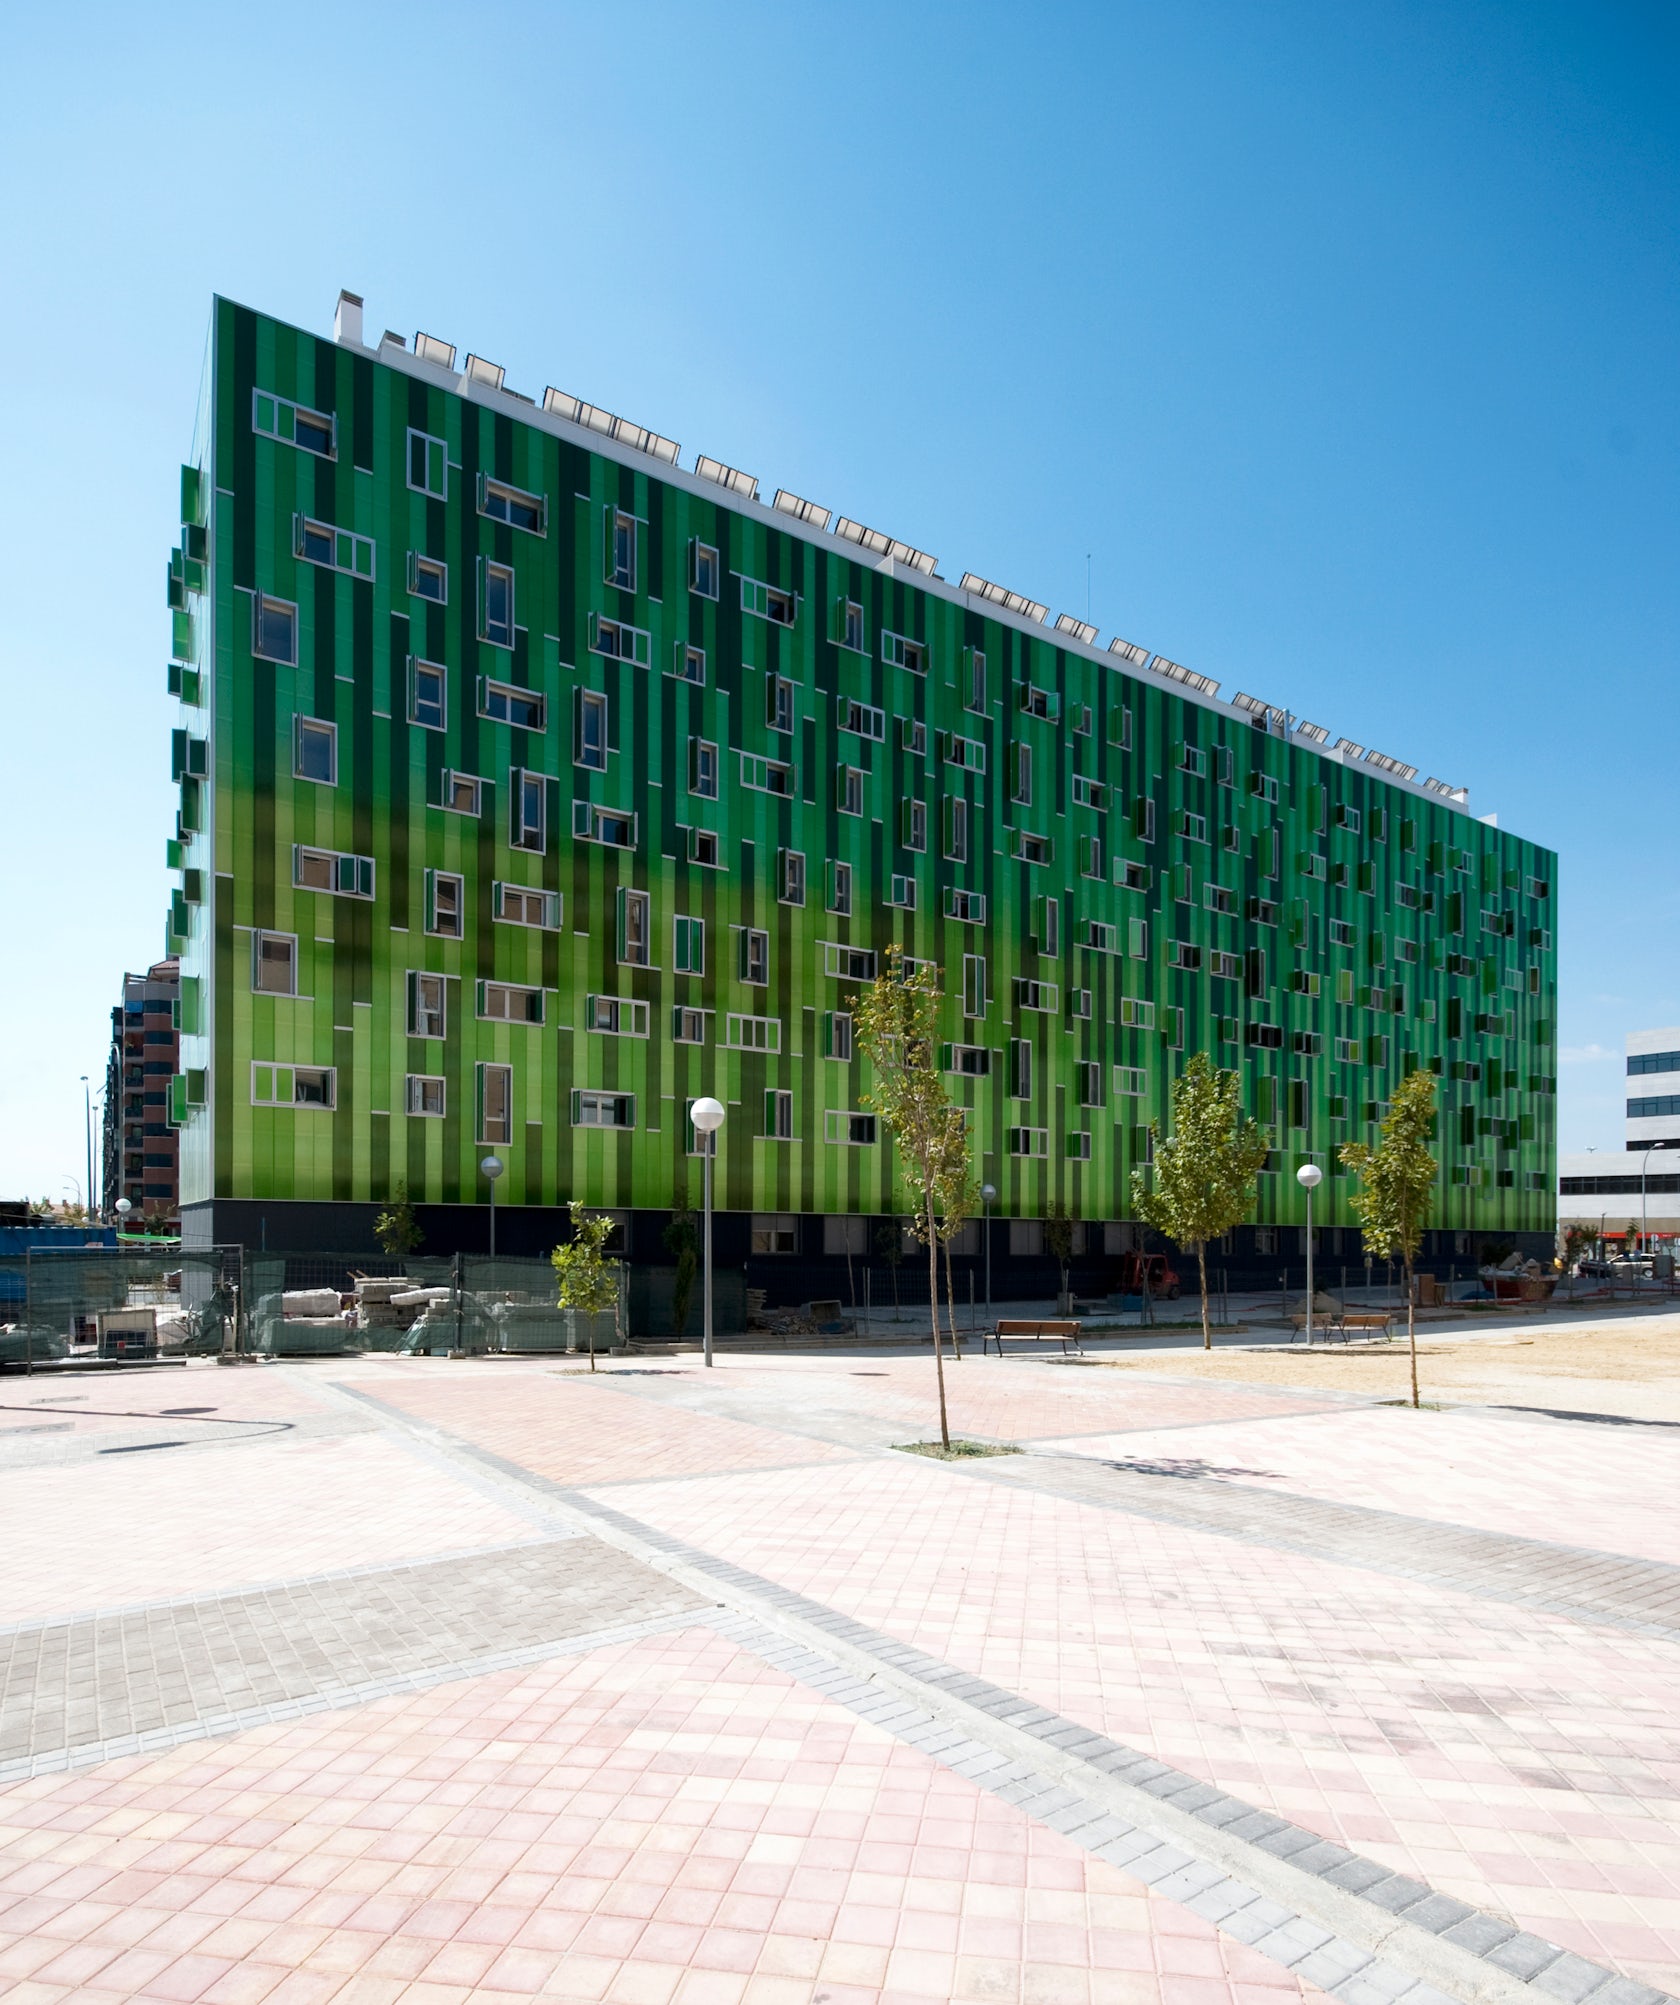 The Psychology of Color: The Natural Inclinations of 9 Truly Green Buildings  - Architizer Journal